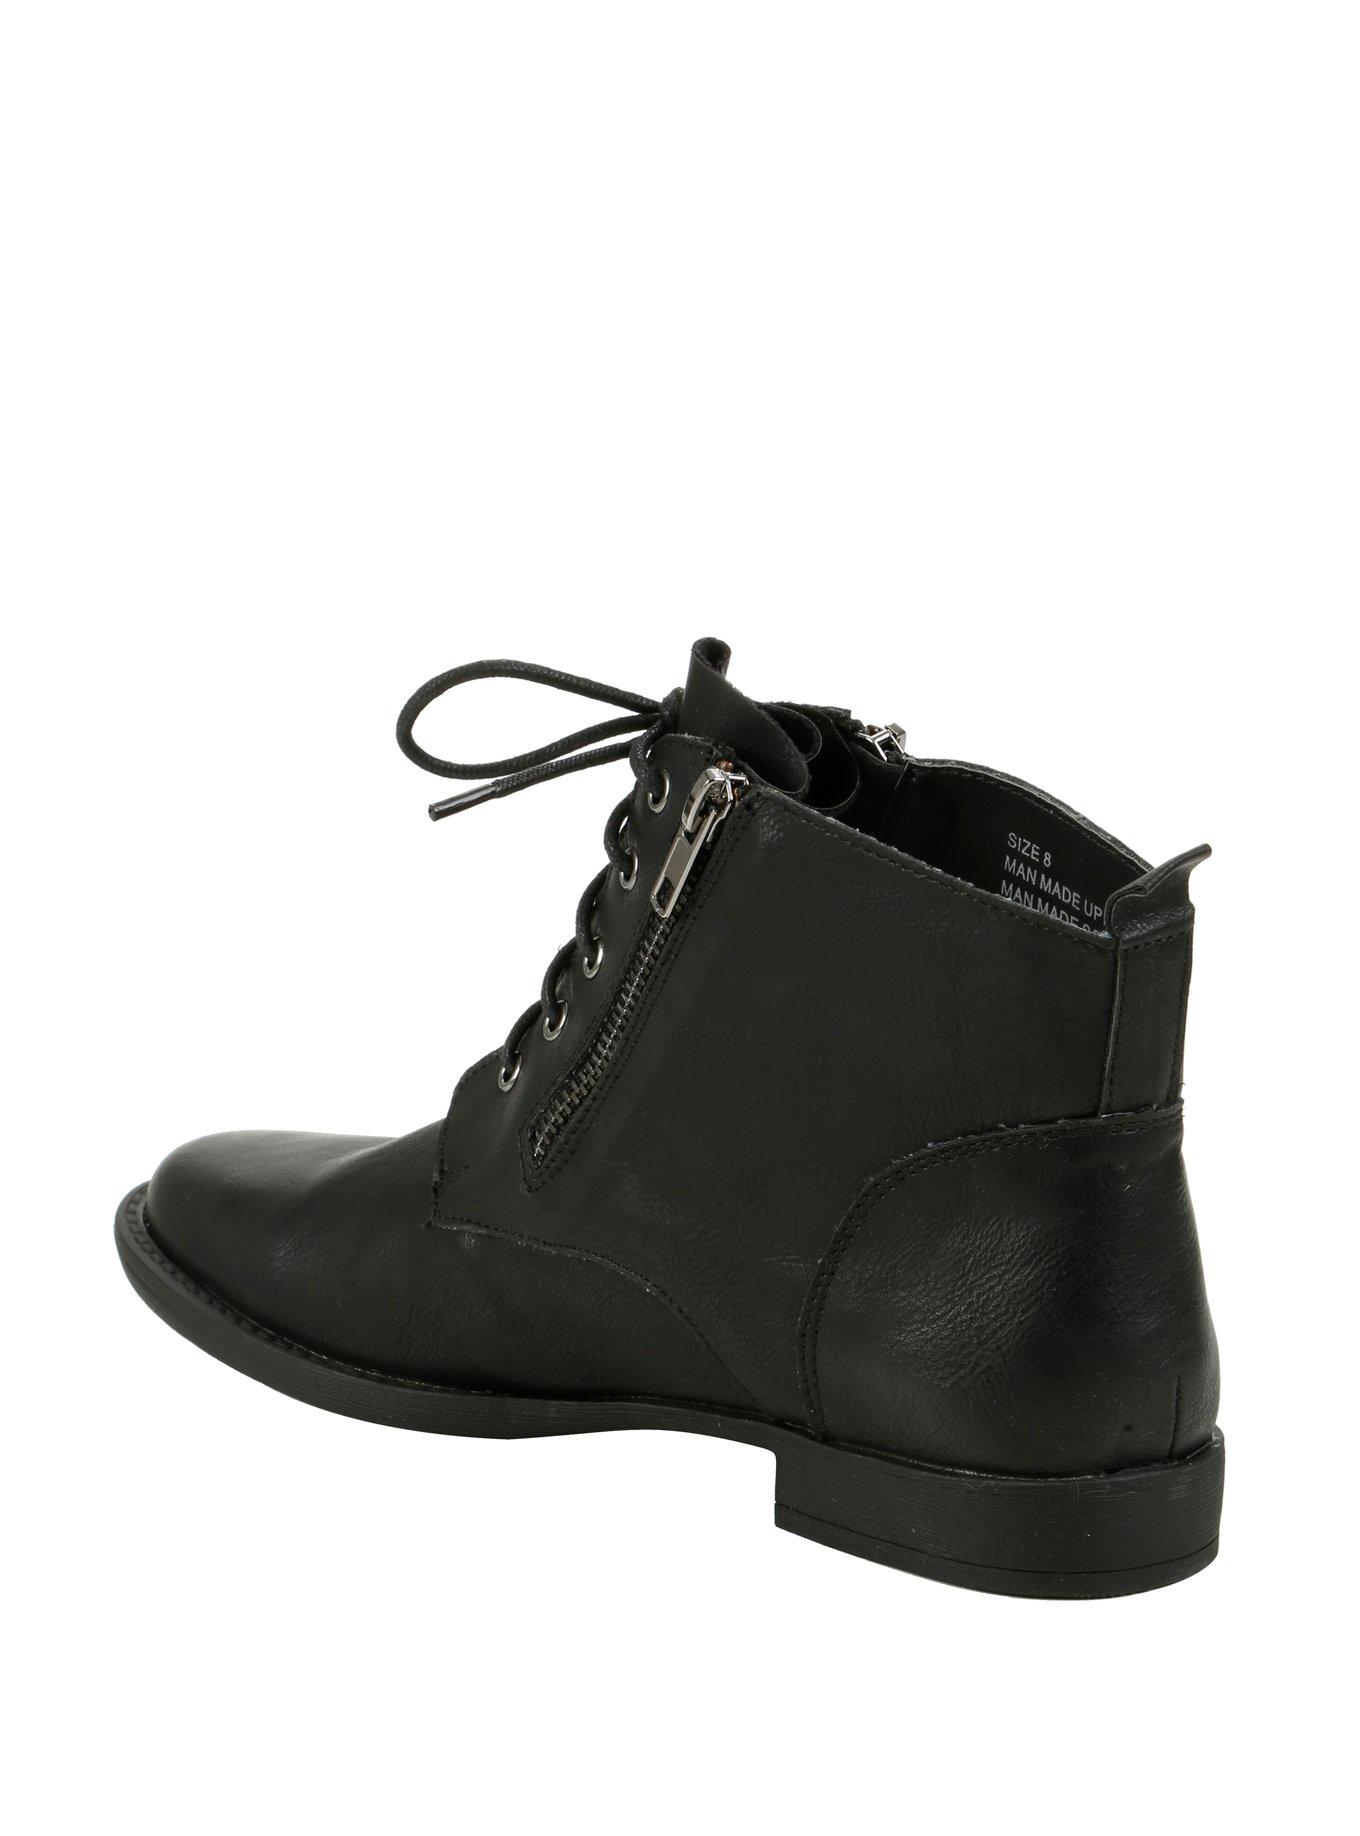 Black Lace-Up Zipper Ankle Booties, , alternate